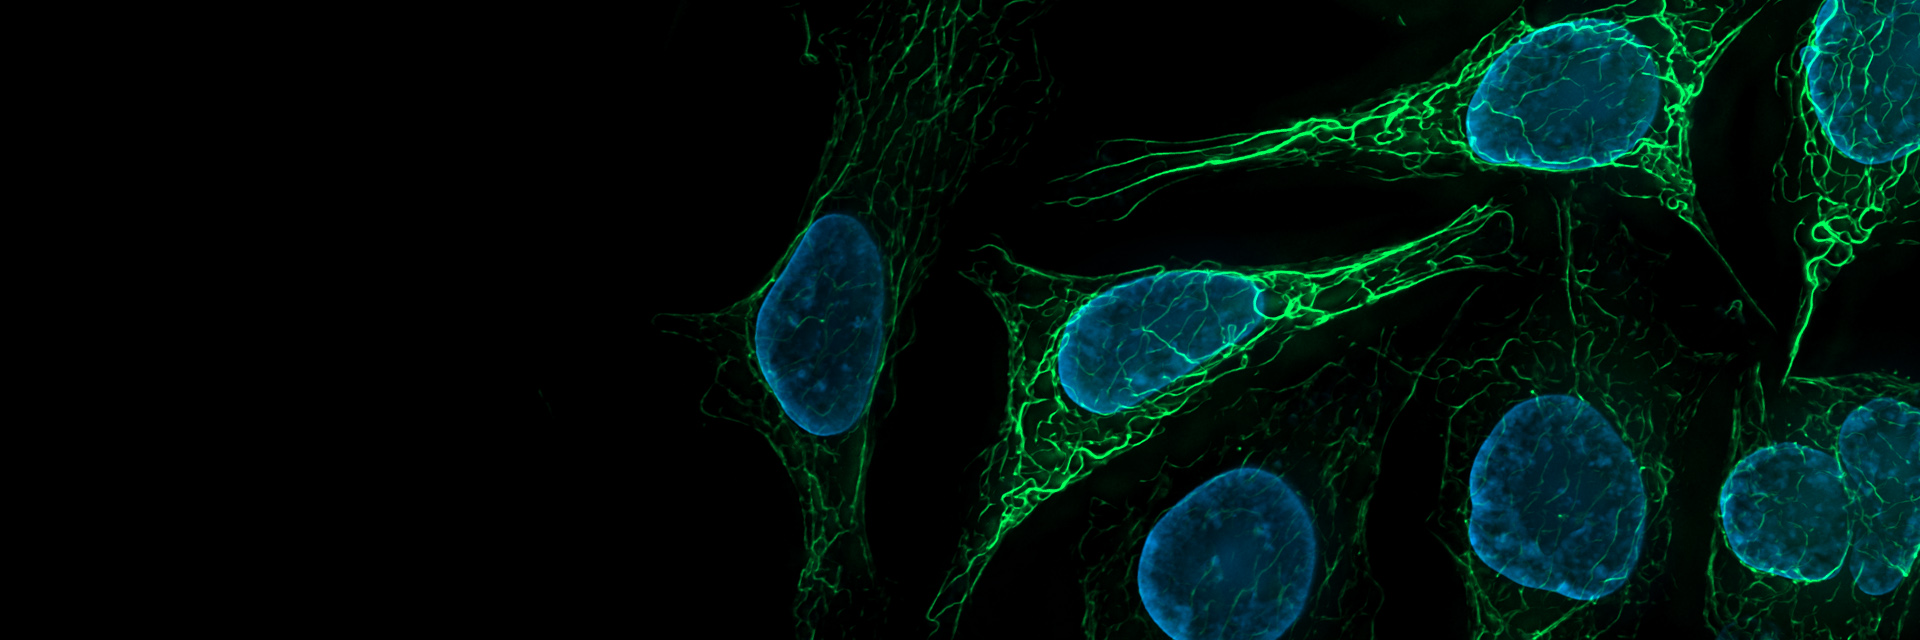 SK8 K18 Mouse Cells. Vimentin stained with Alexa 488 (green), nuclei stained with DAPI (blue).